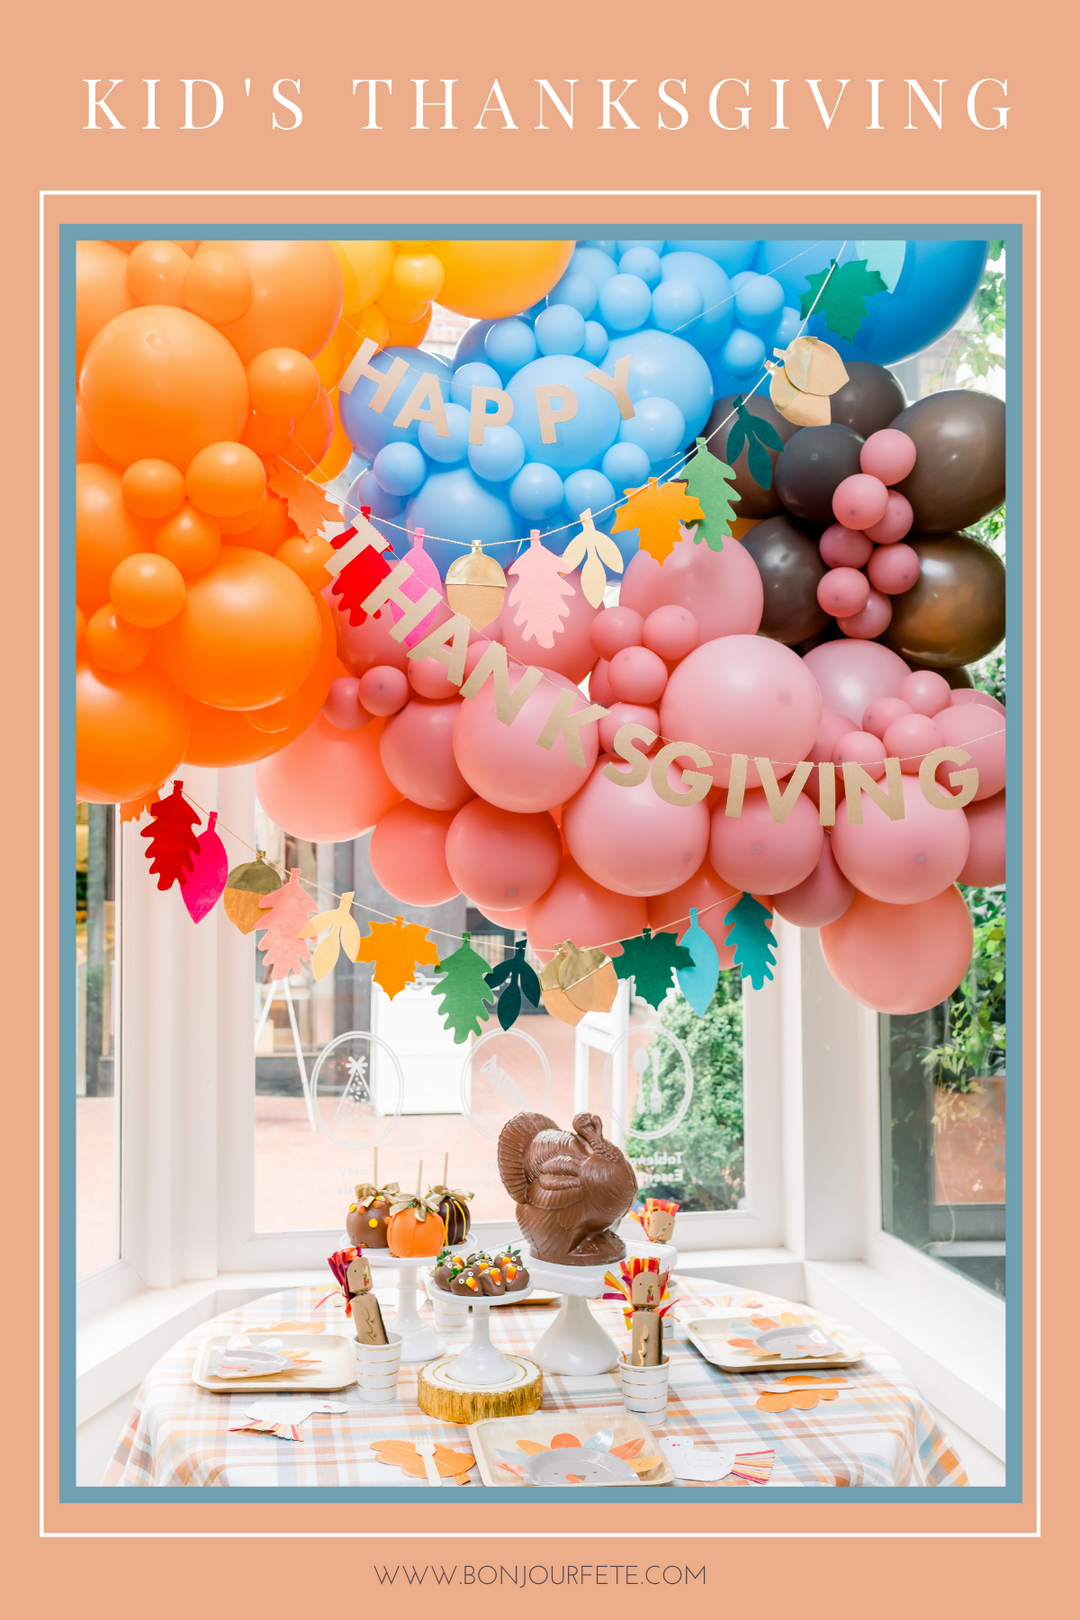 KIDS THANKSGIVING PARTY AND TURKEY TABLE IDEAS